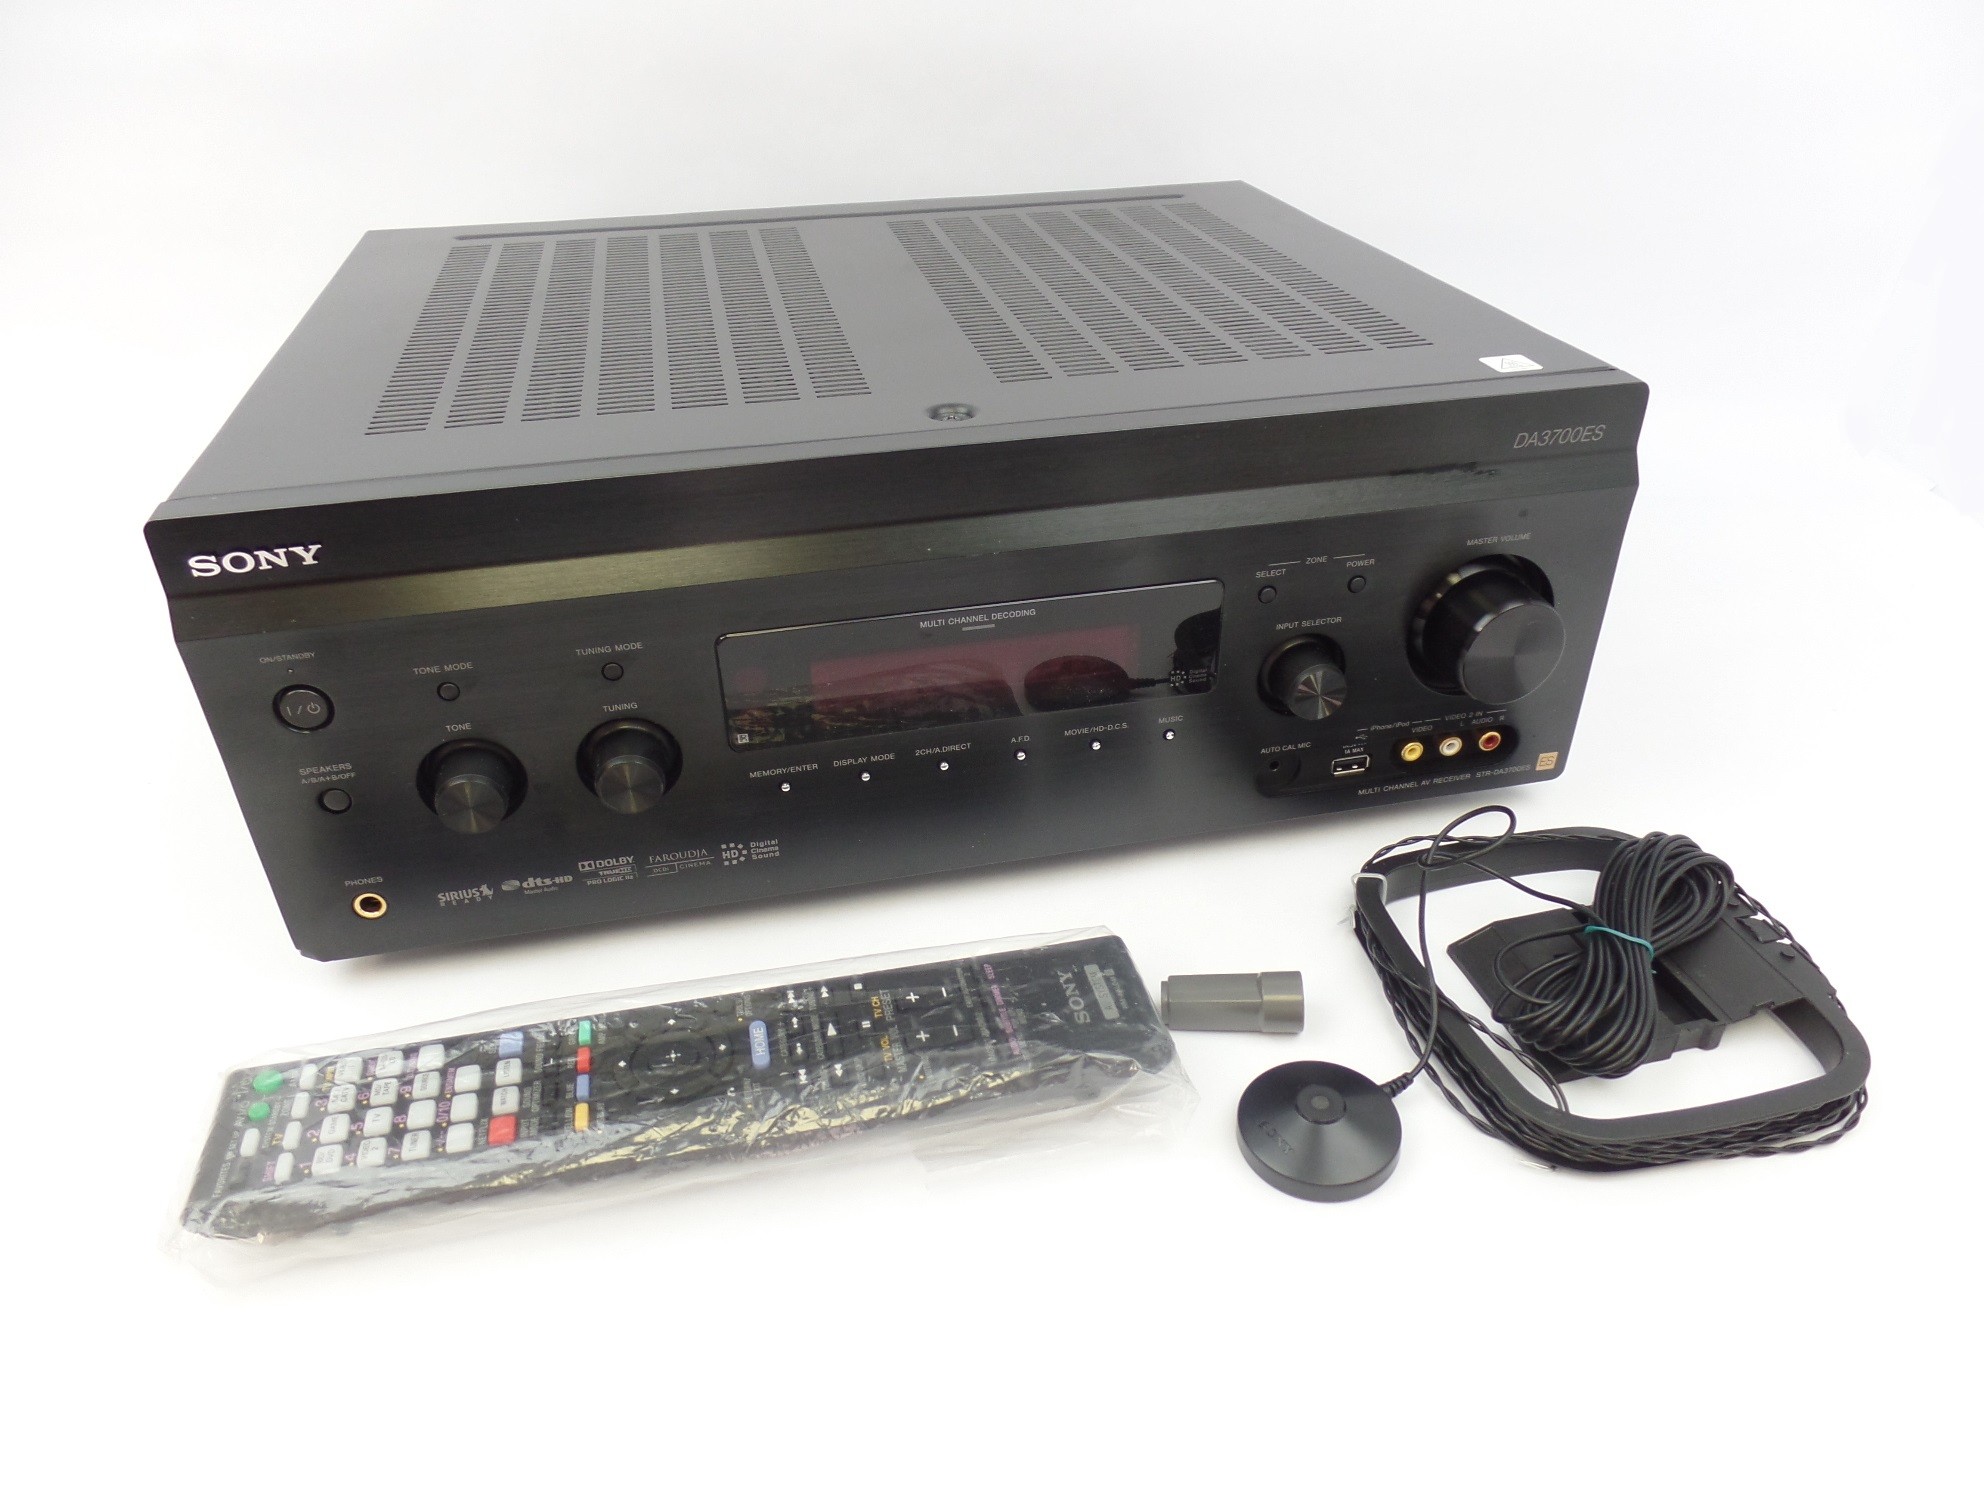 Read: Doesn't power on. Sony DA3700ES Receiver For Parts